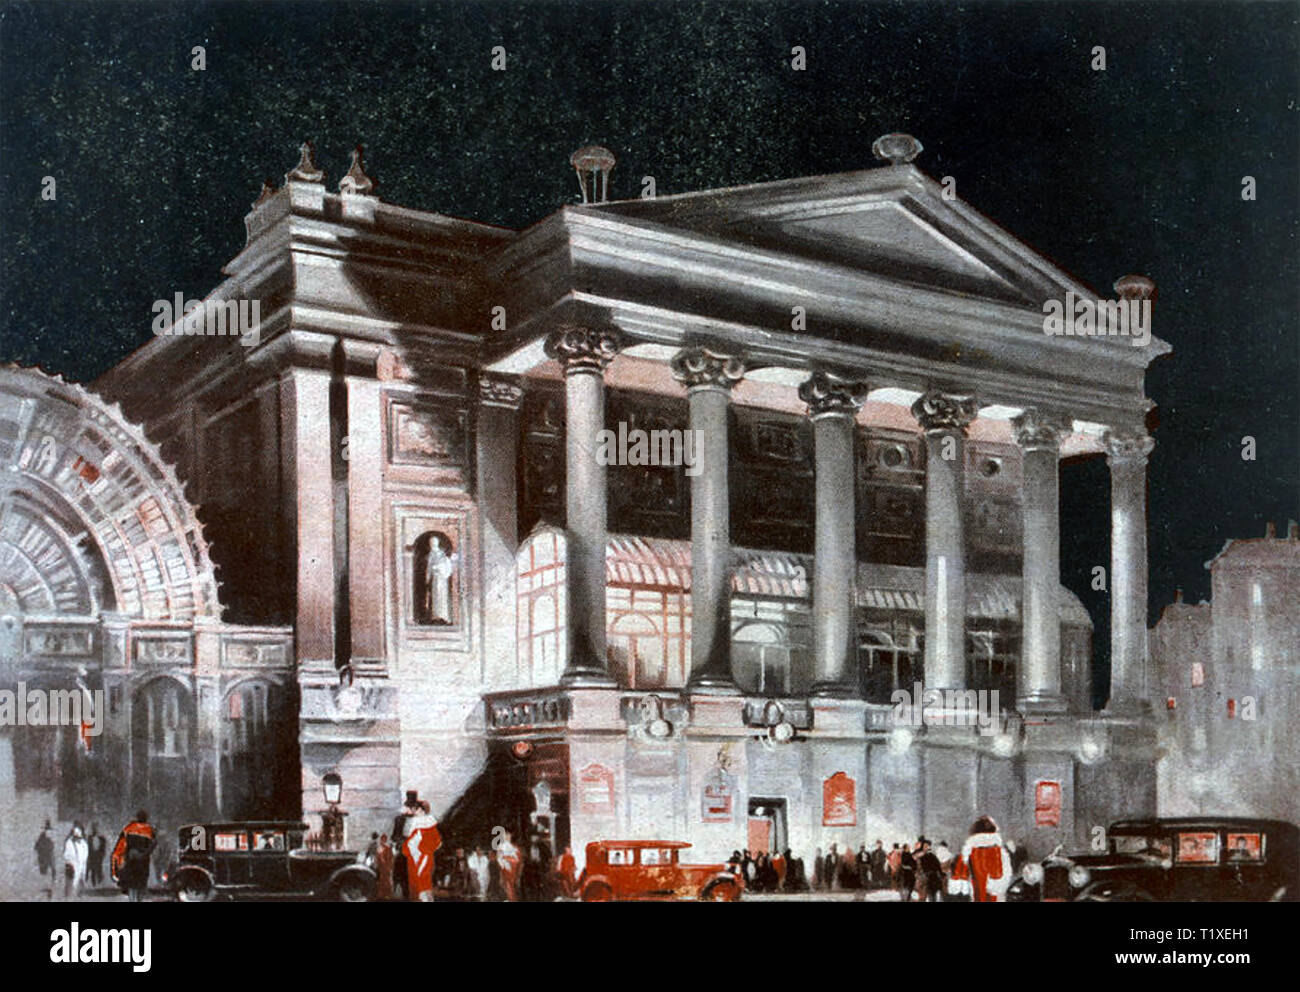 ROYAL OPERA HOUSE, Covent Garden, London, on a fashionable night in the 1920s Stock Photo